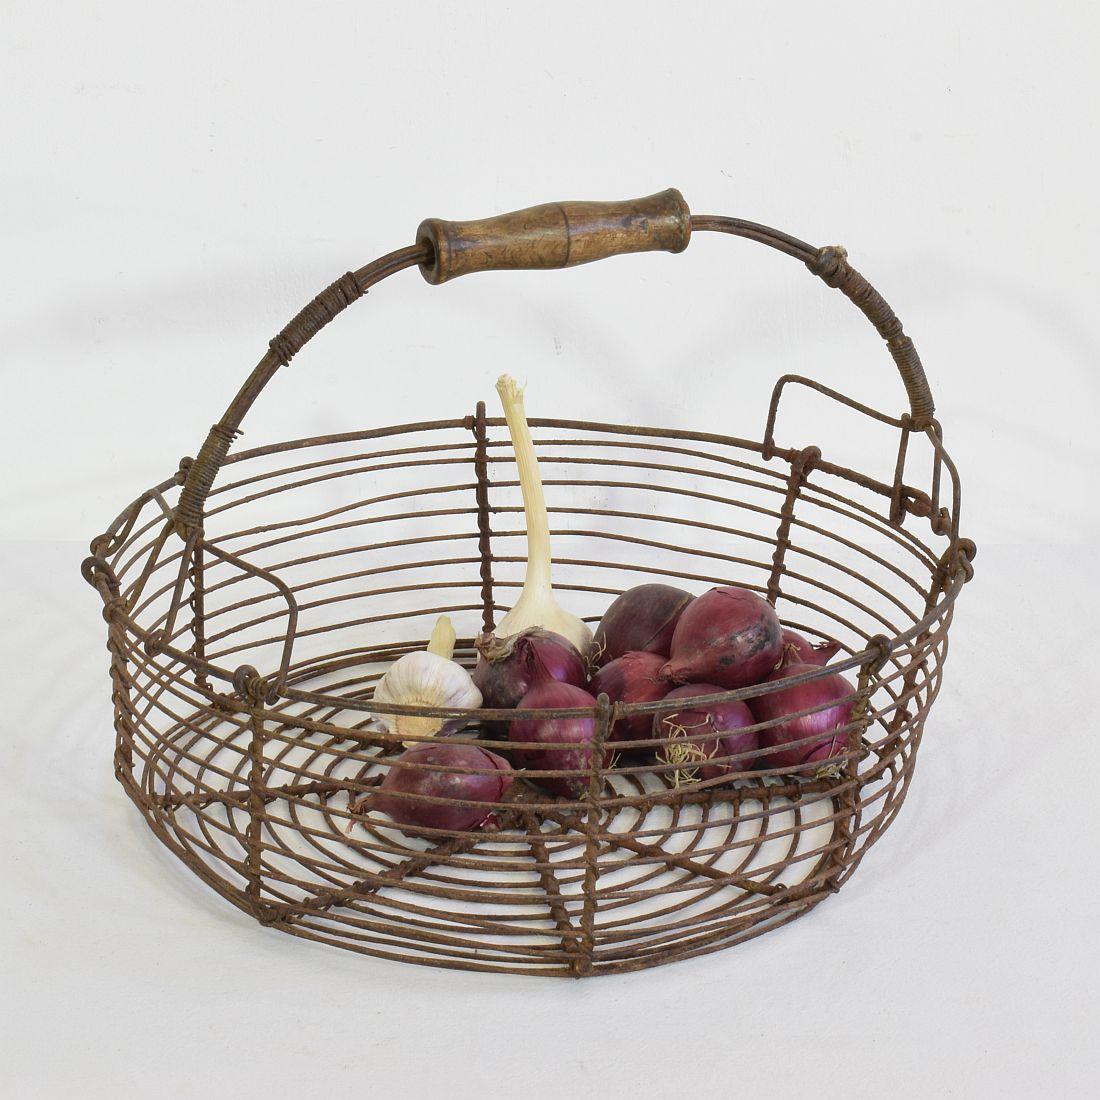 Beautiful iron wirework basket with wooden handle. Very nicely made and a great statement on your countertop.
France, circa 1850-1900.
Weathered.